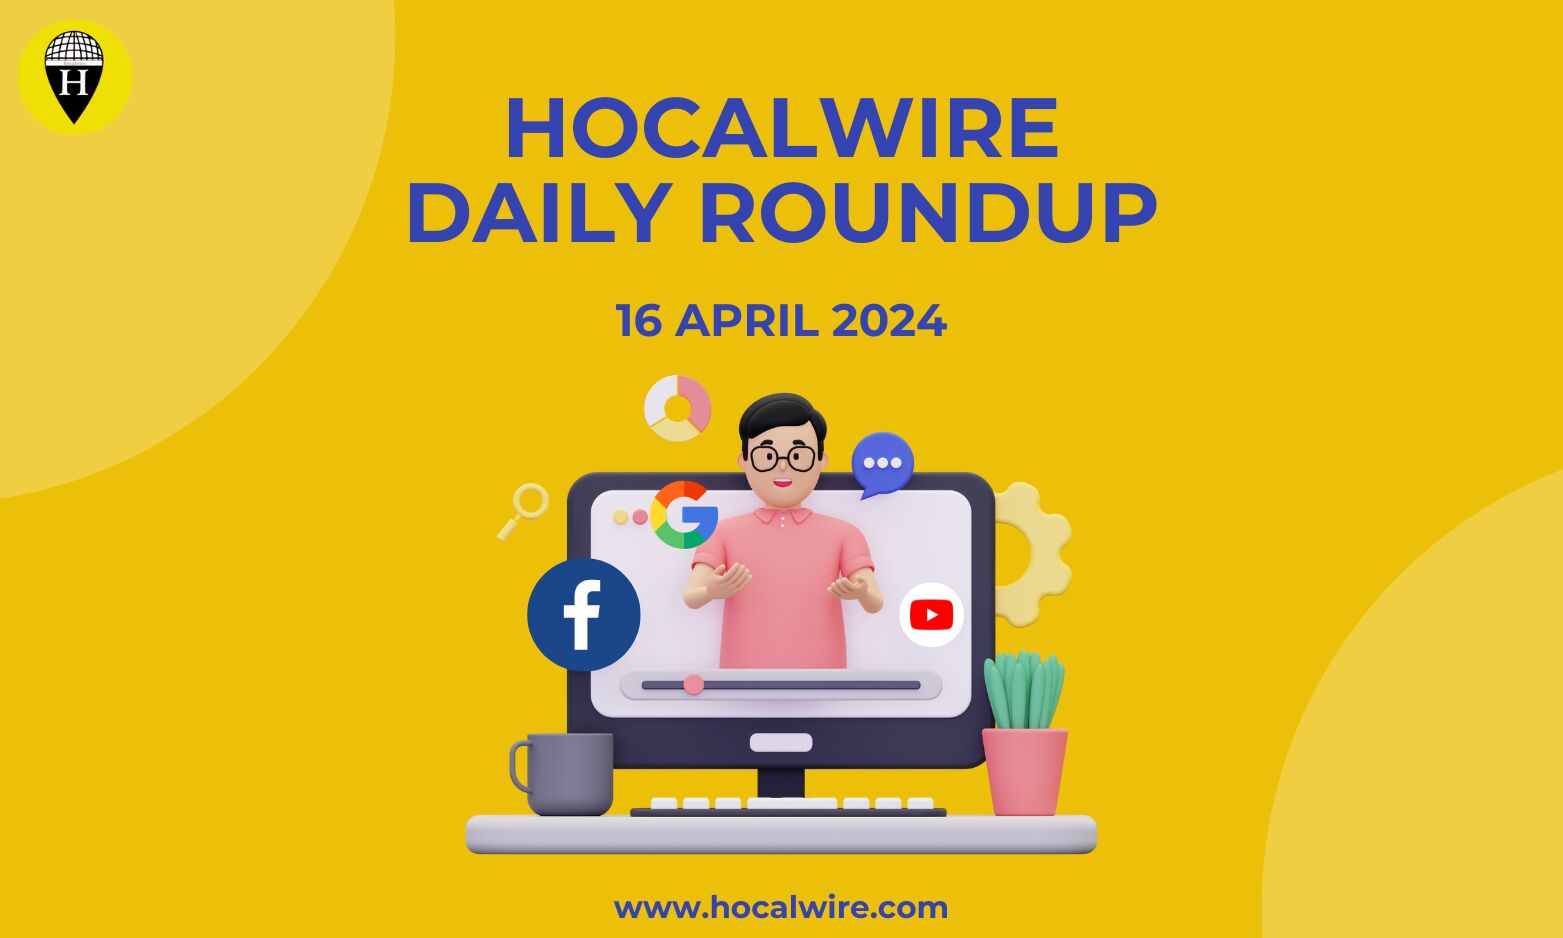 Hocalwire Daily Roundup